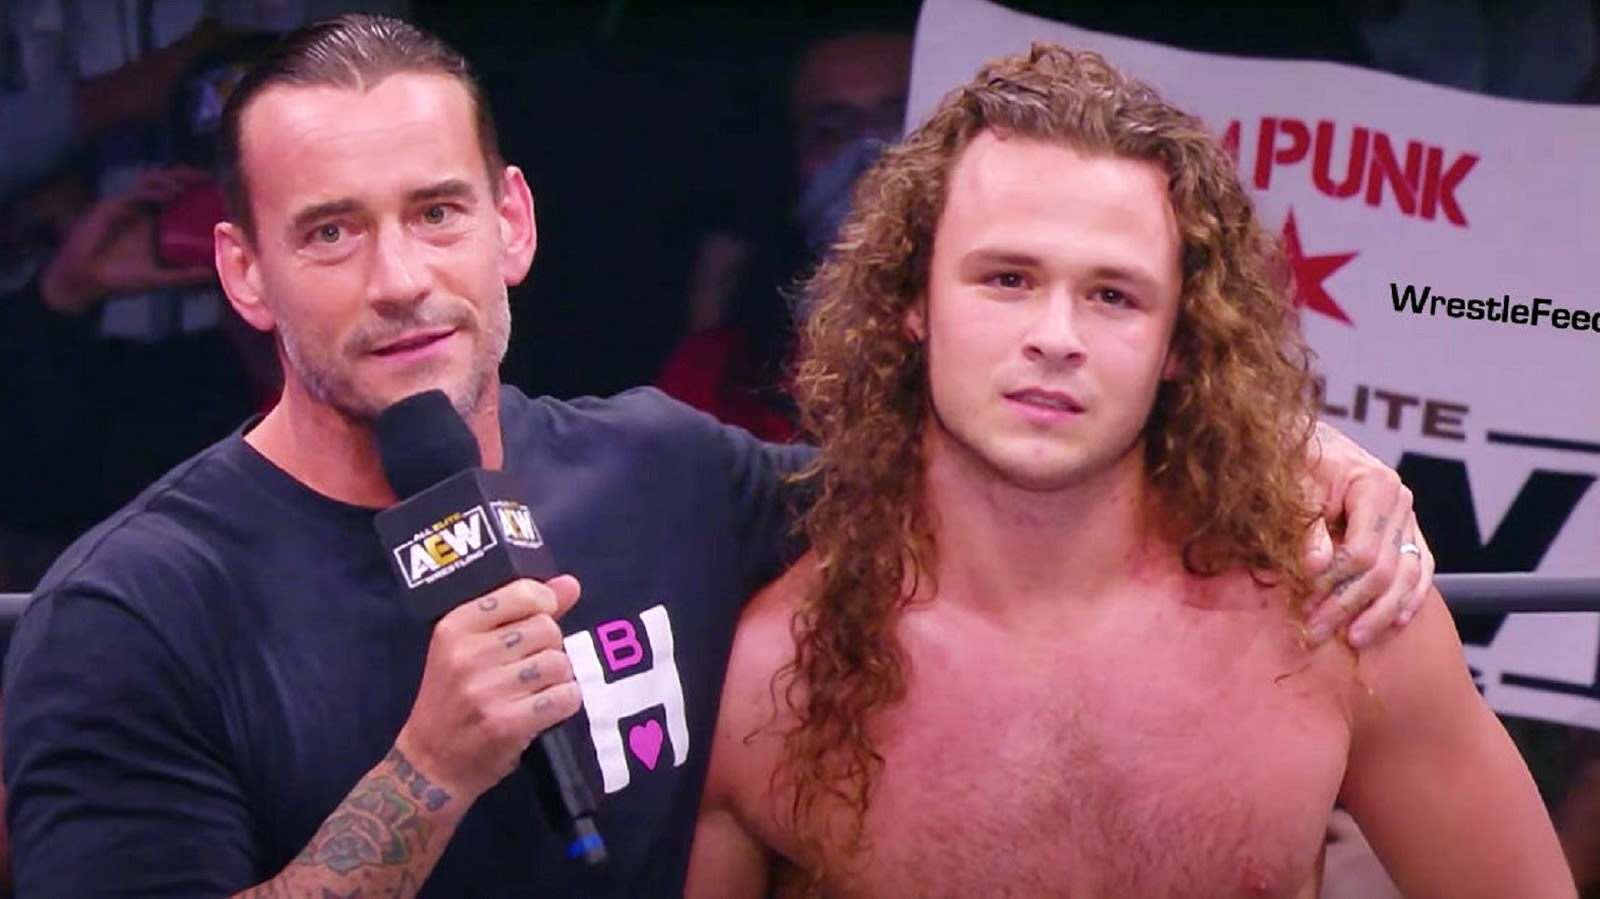 CM Punk Reacts To AEW Airing Footage Of Jack Perry Altercation At All In - Wrestling Inc.